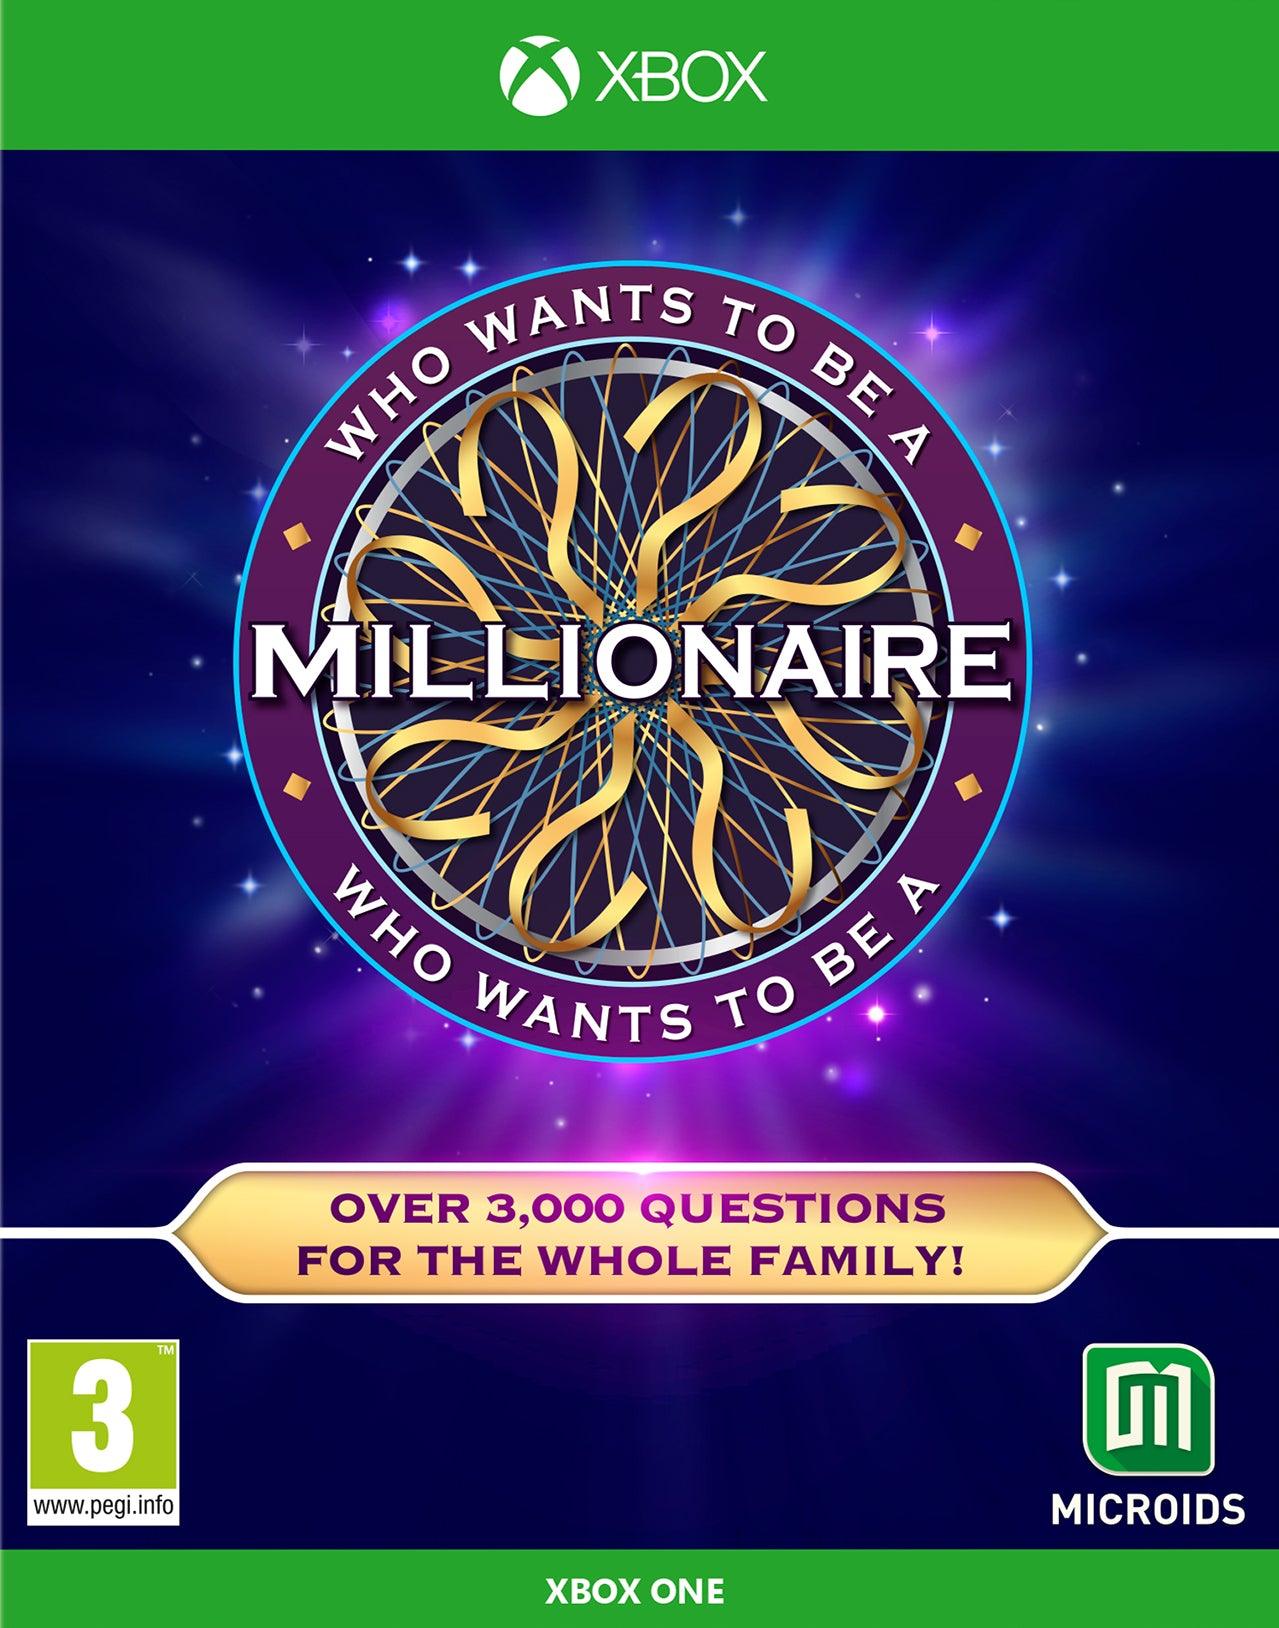 Who Wants To Be A Millionaire - Want a New Gadget